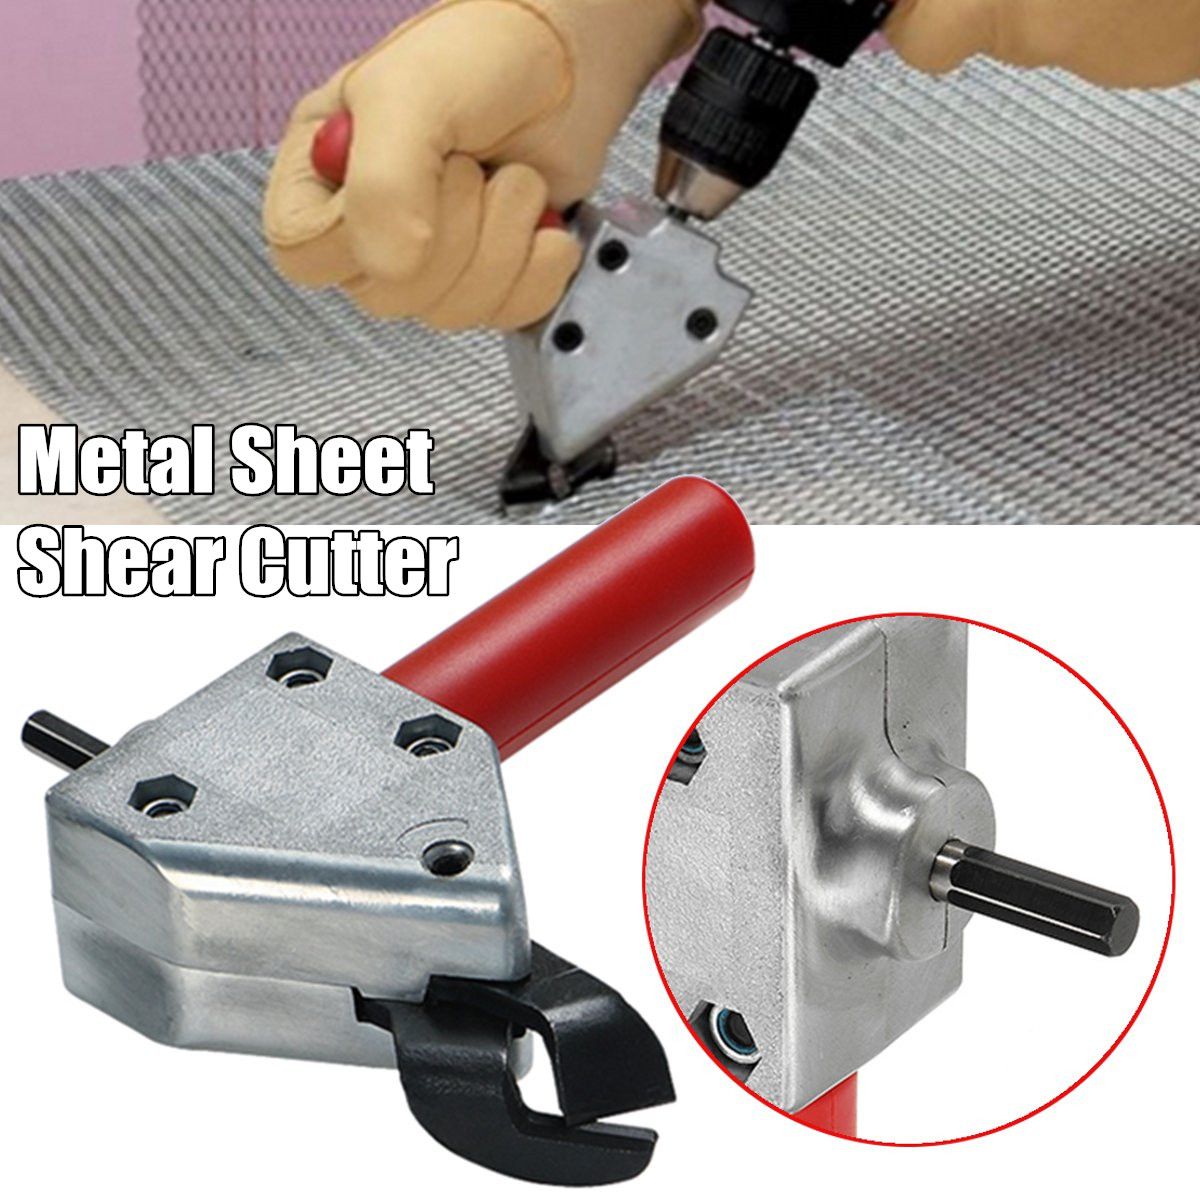 Metal-Sheet-Cutter-Adapter-Iron-Wire-Netting-Nibbler-Cutter-For-Electric-Drill-1328513